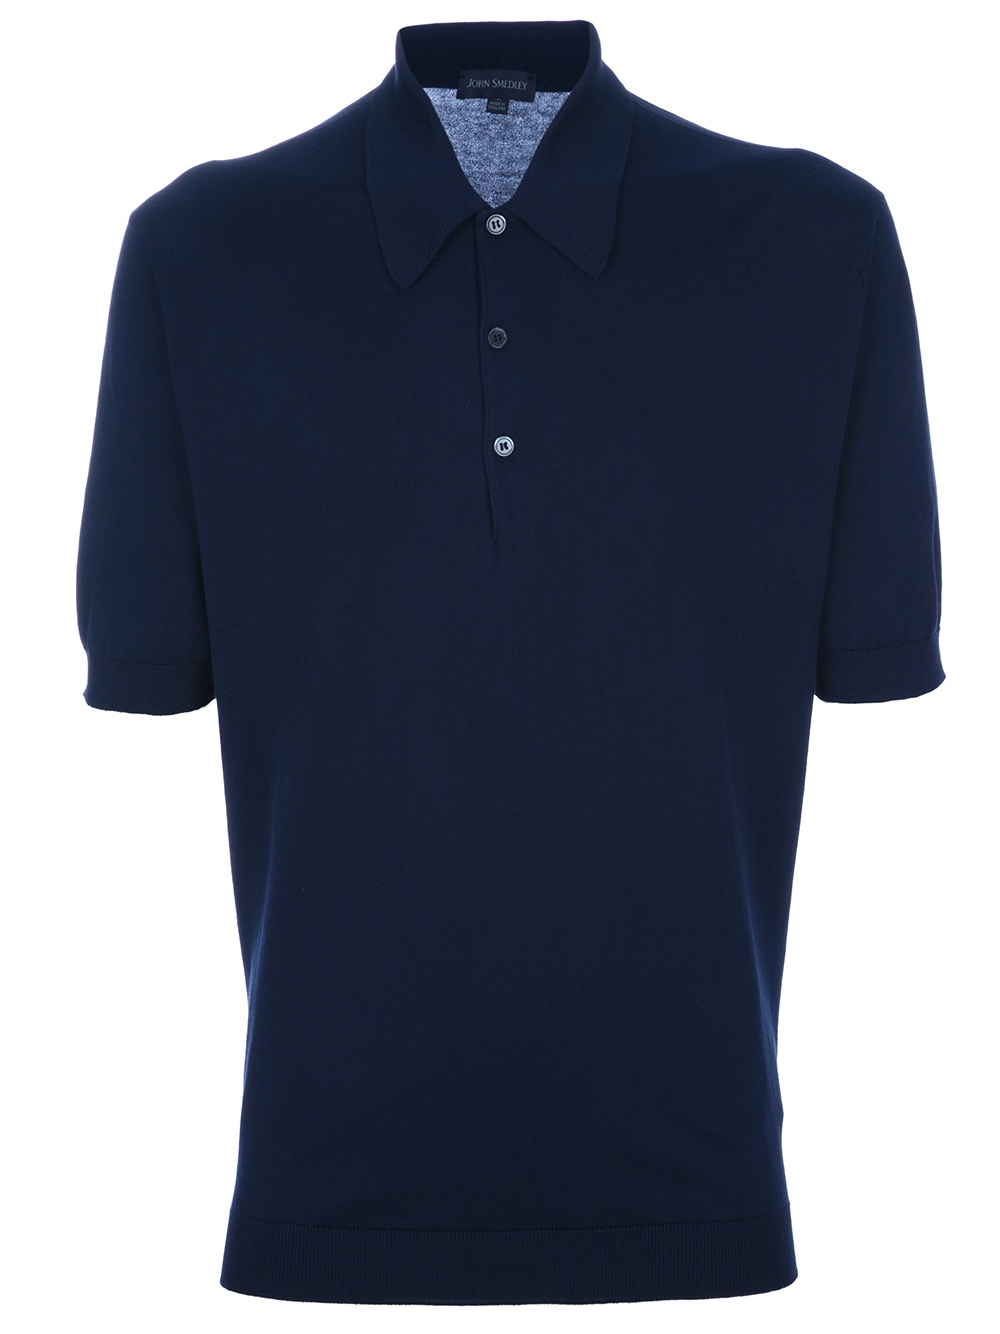 John Smedley Isis Polo Shirt in Red (Blue) for Men - Lyst